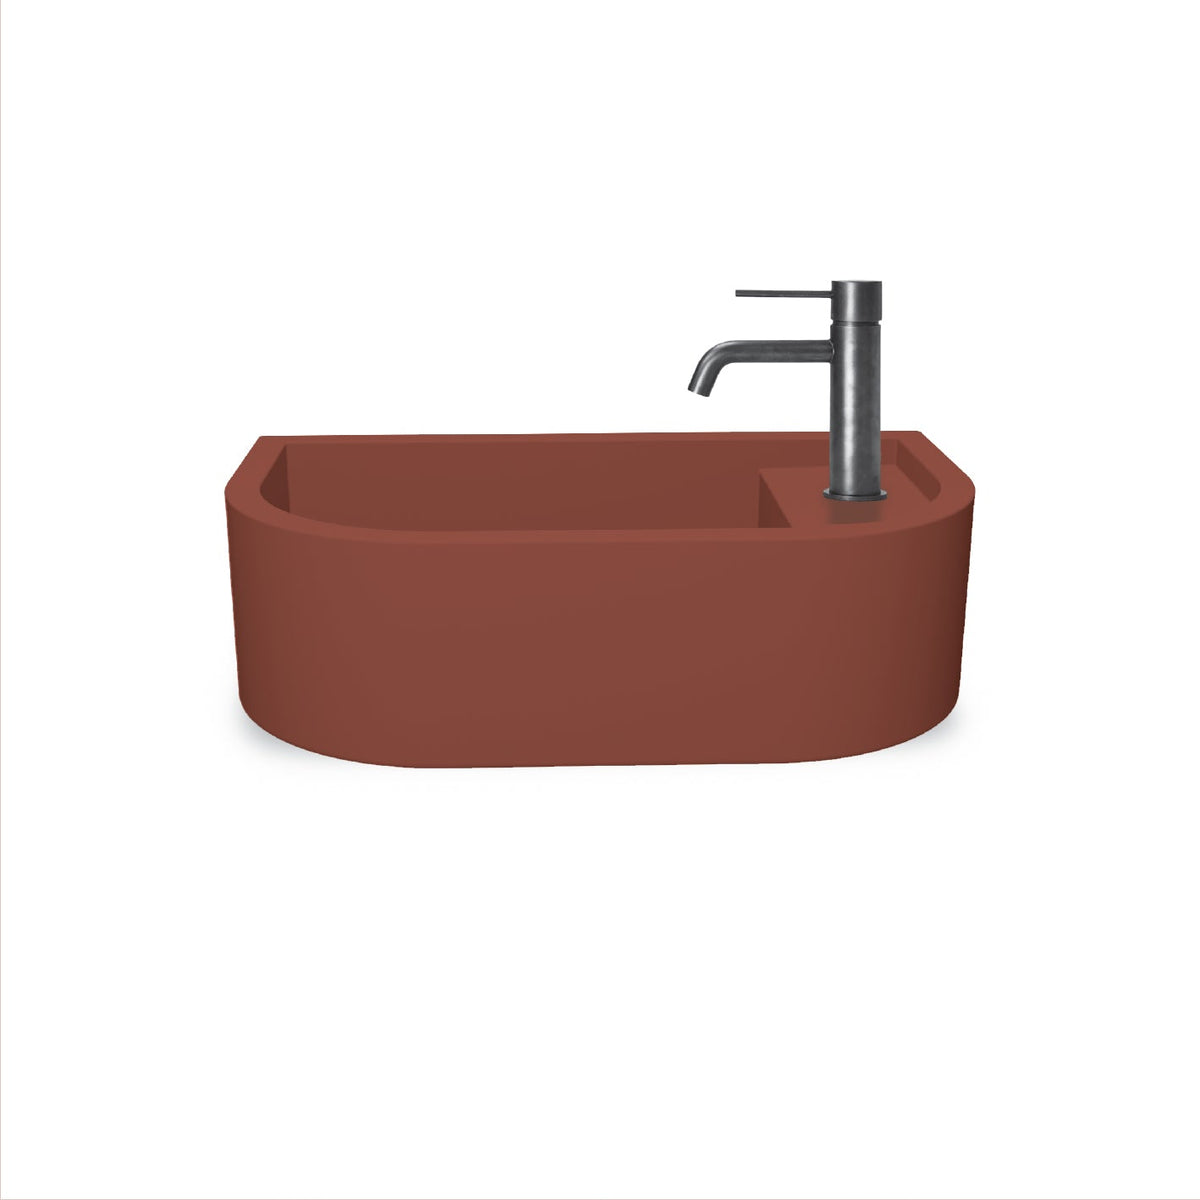 Loop 01 Basin - Overflow - Surface Mount (Clay,Tap Hole,Black)